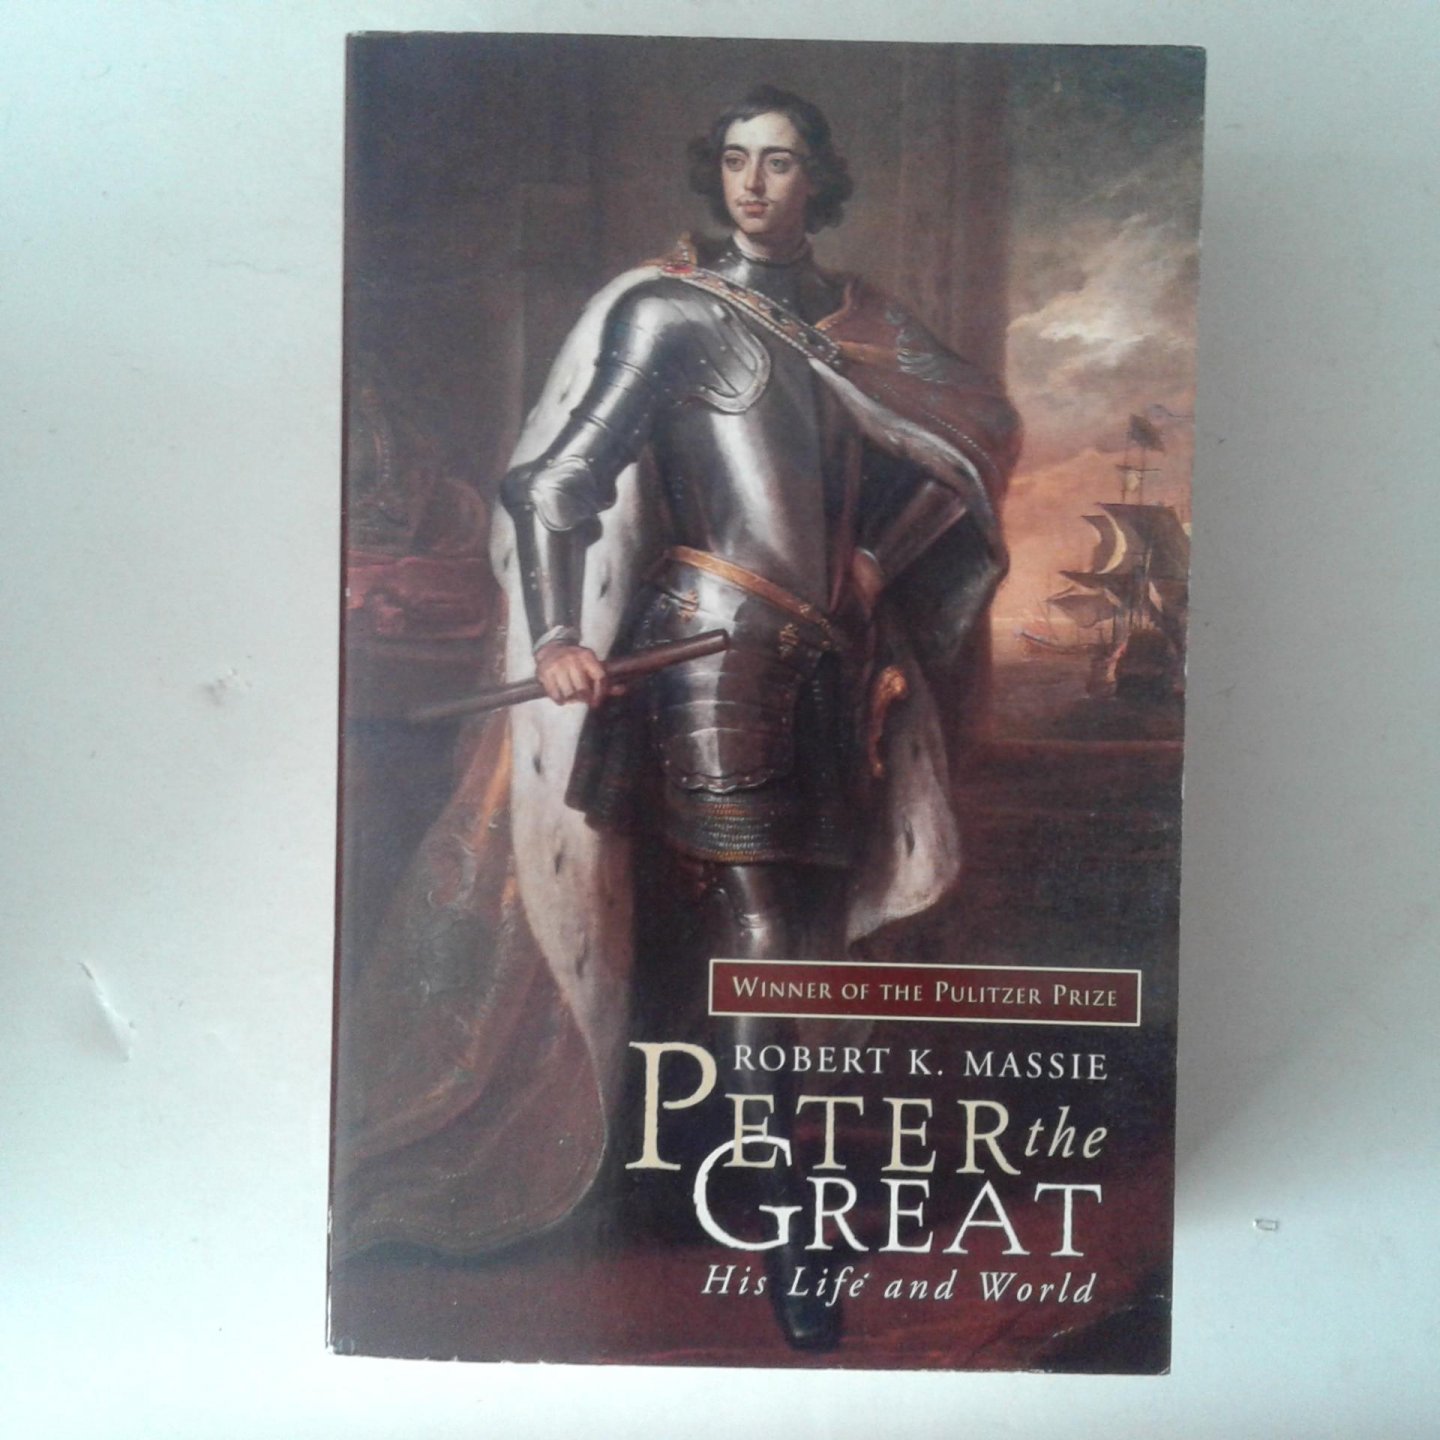 Massie, Robert K. - Peter the Great ; His Life and World